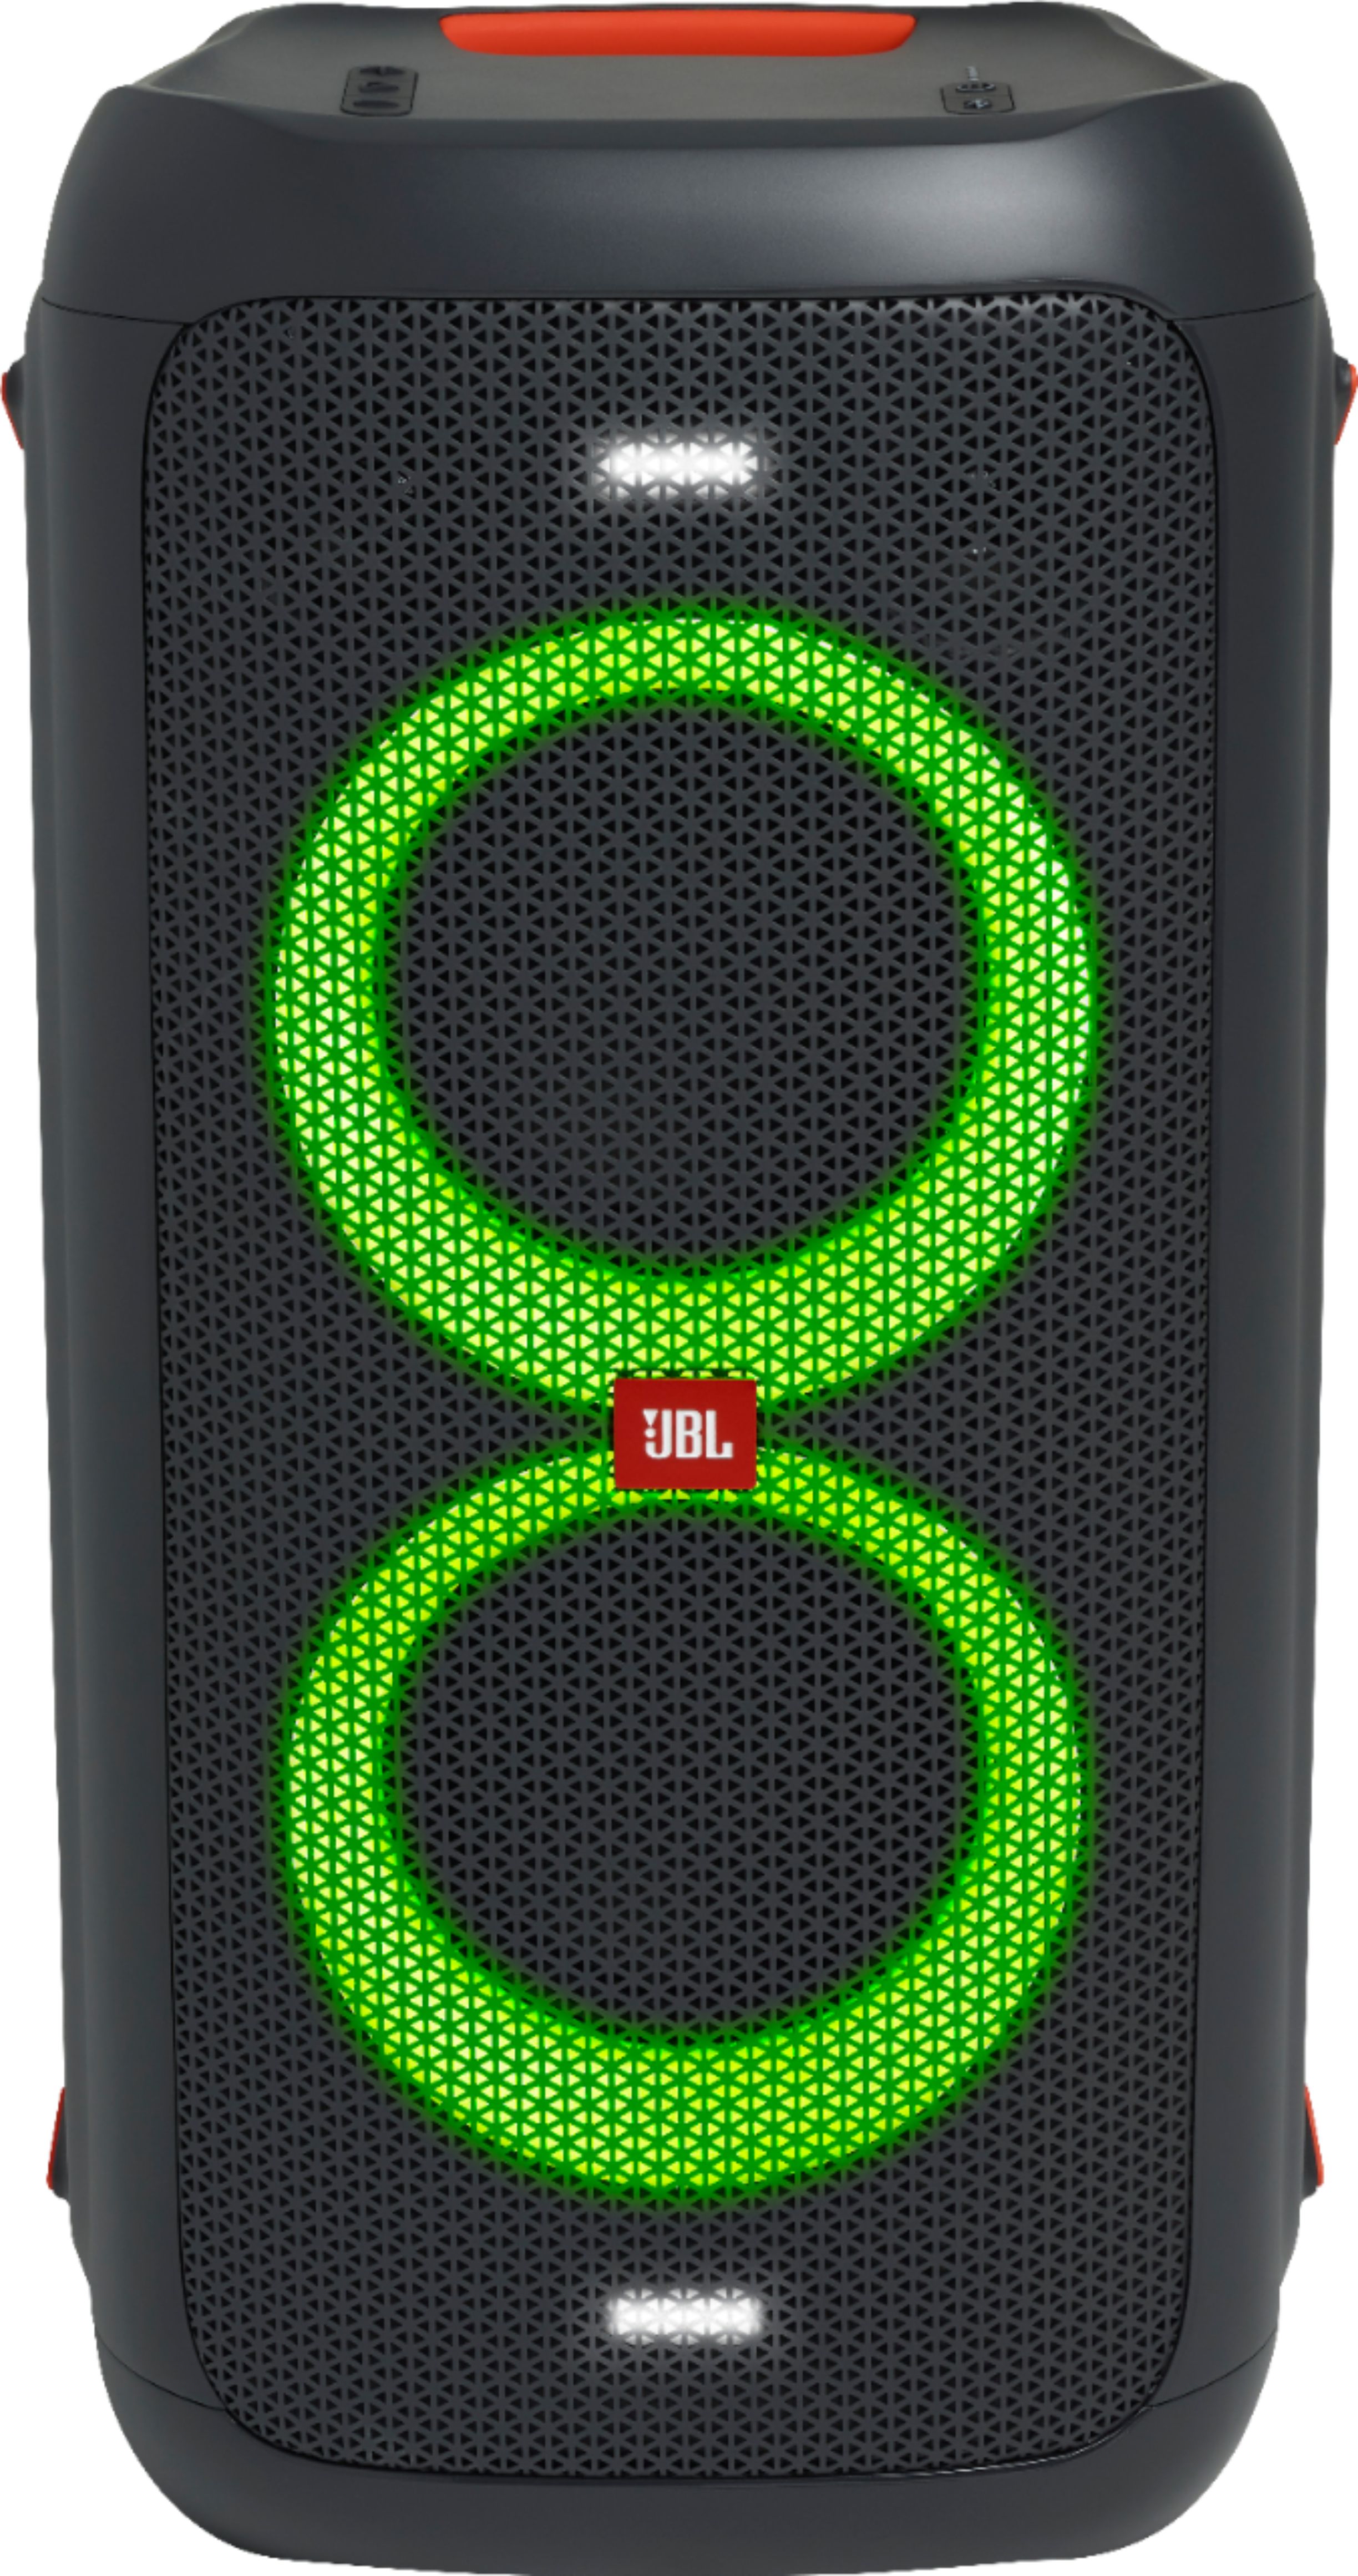 How Much are Jbl Bluetooth Speakers 